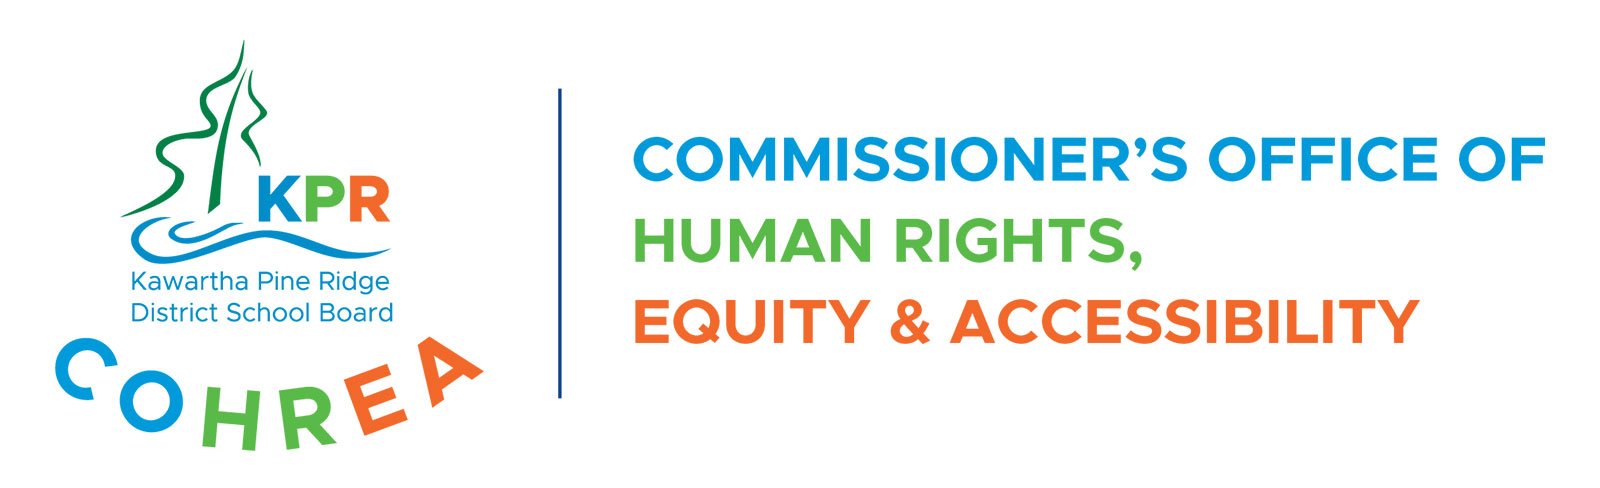 Commissioner's Office of Human Rights, Equity & Accessibility Department Logo 